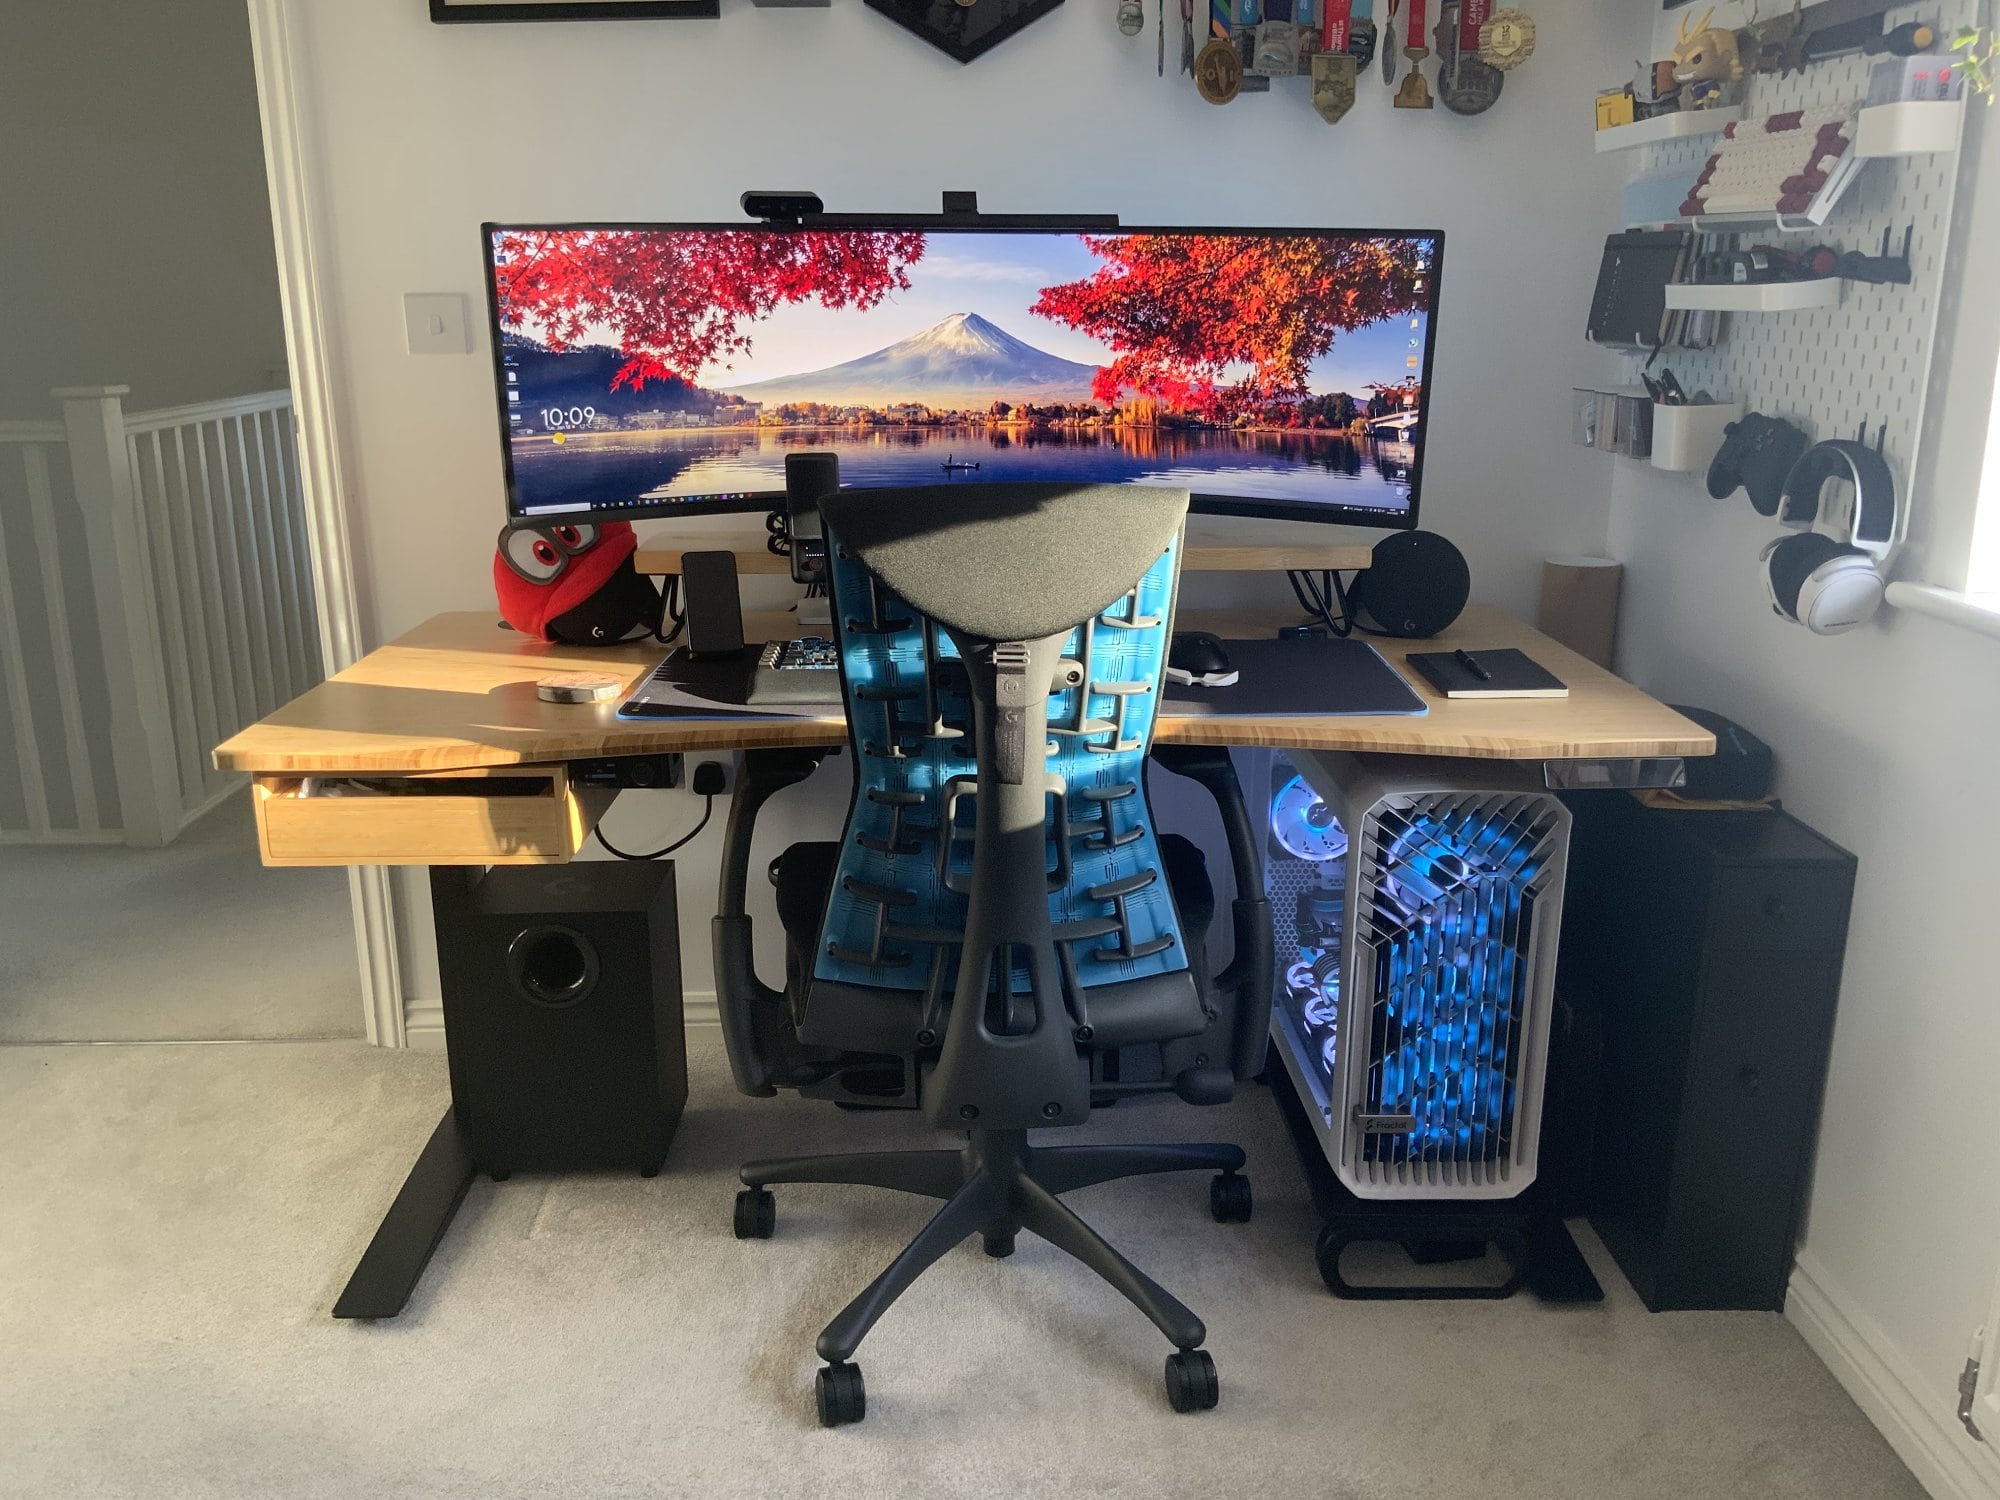 Here's my corner Battlestation. Any suggestions for improvement